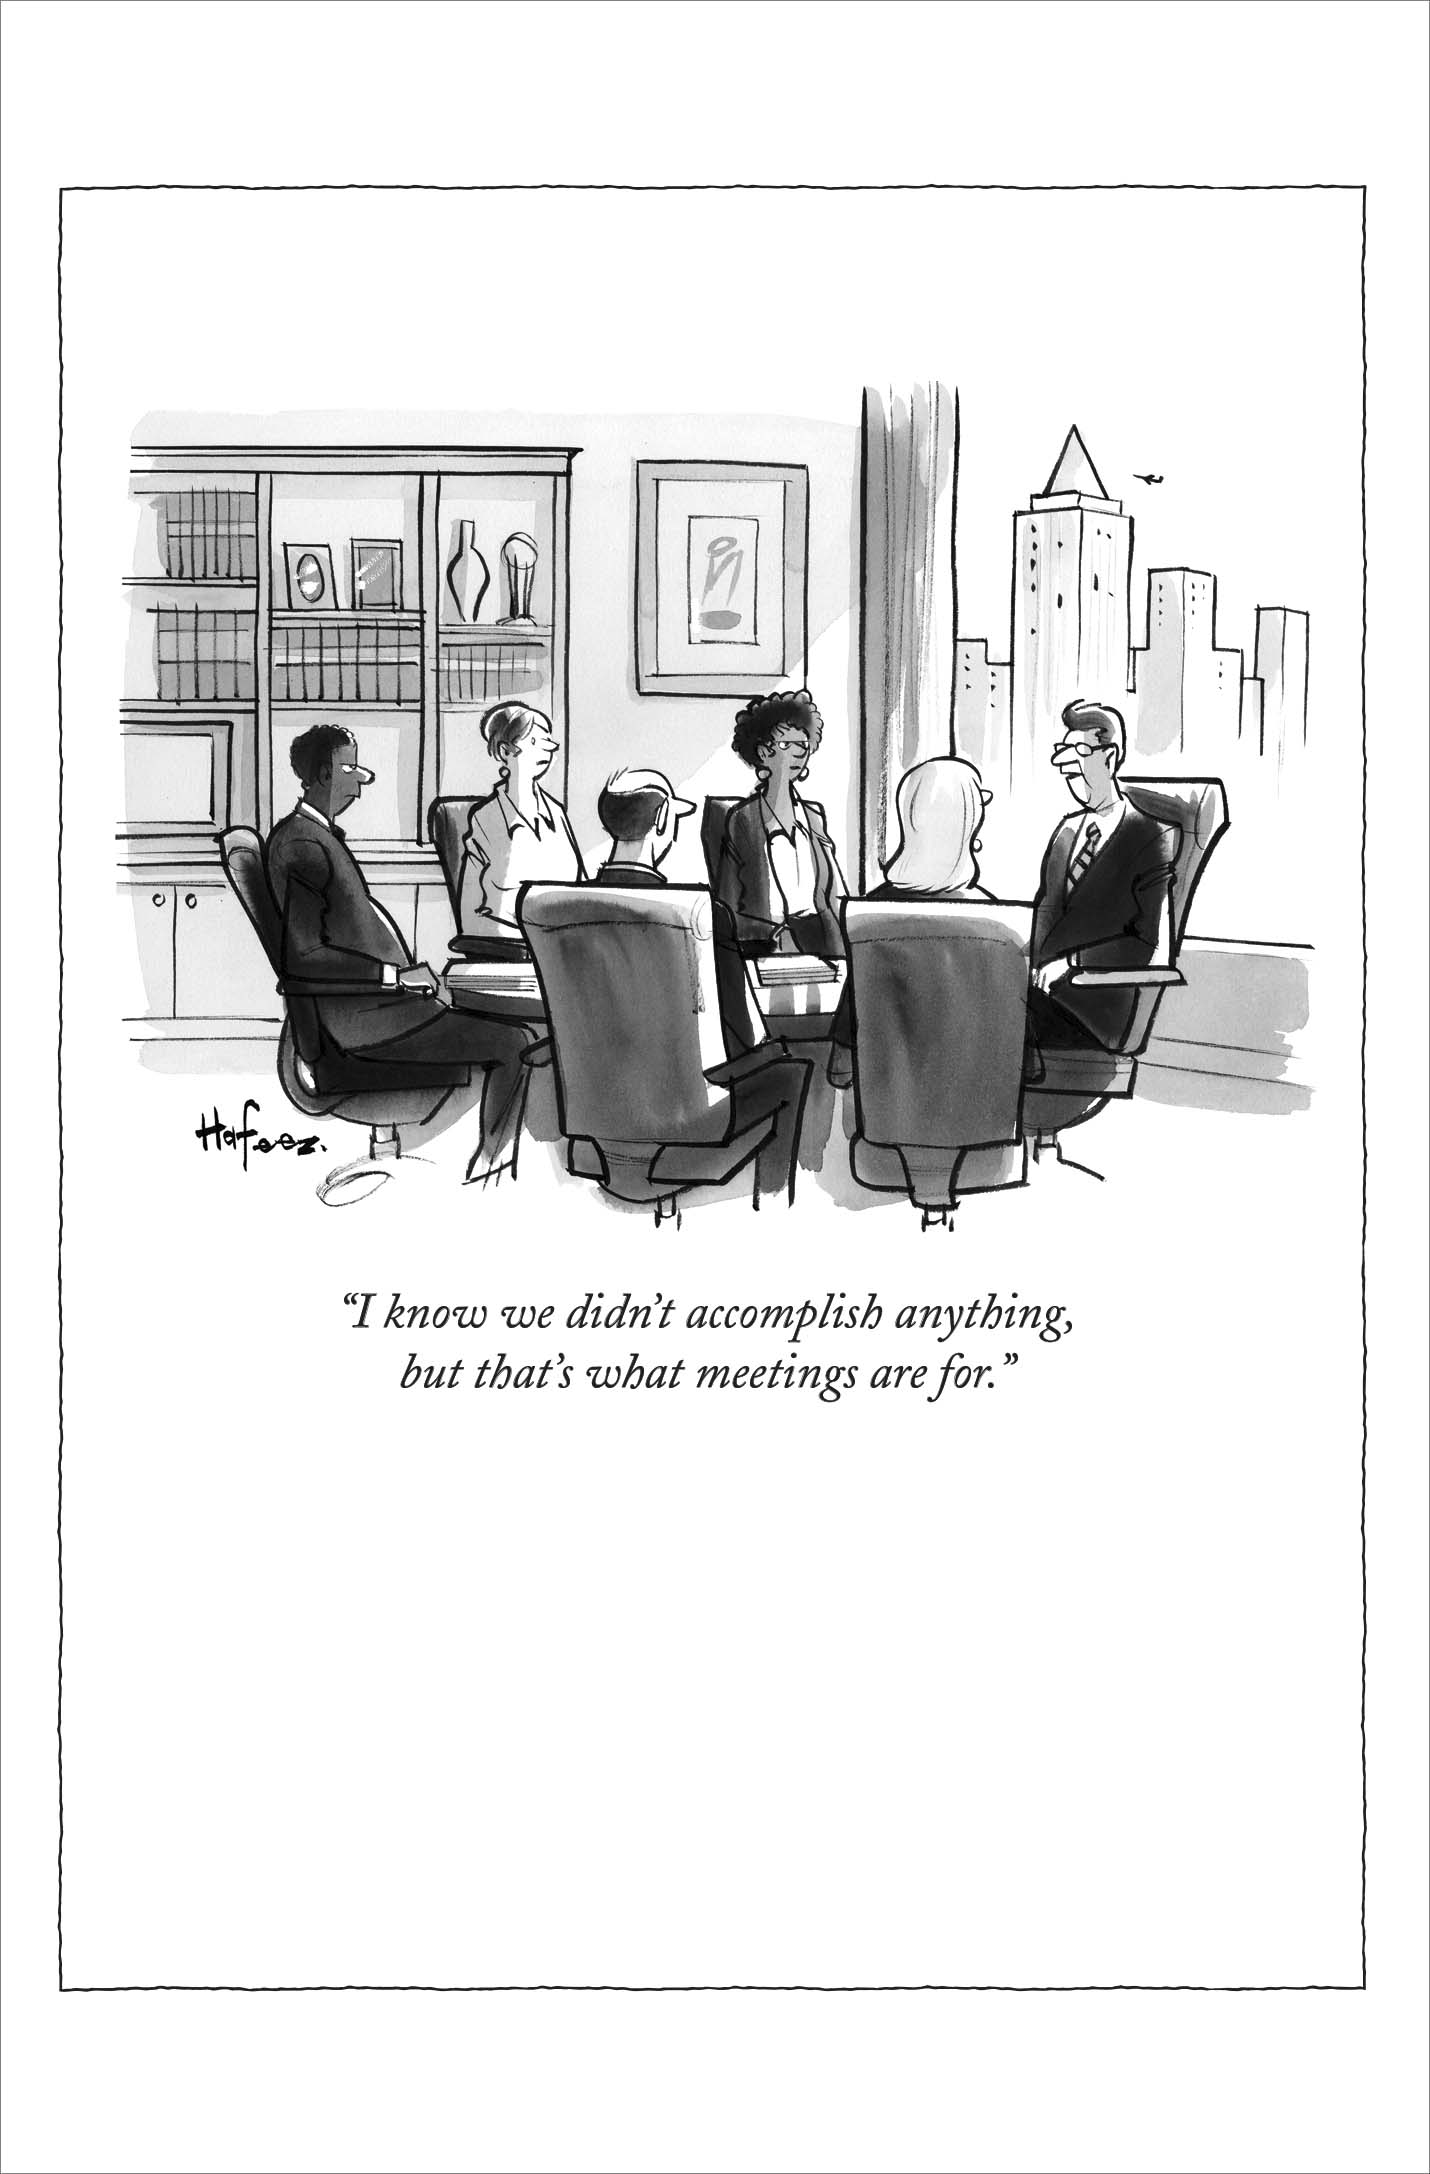 The New Yorker What Meetings Are For Funny Greeting Card